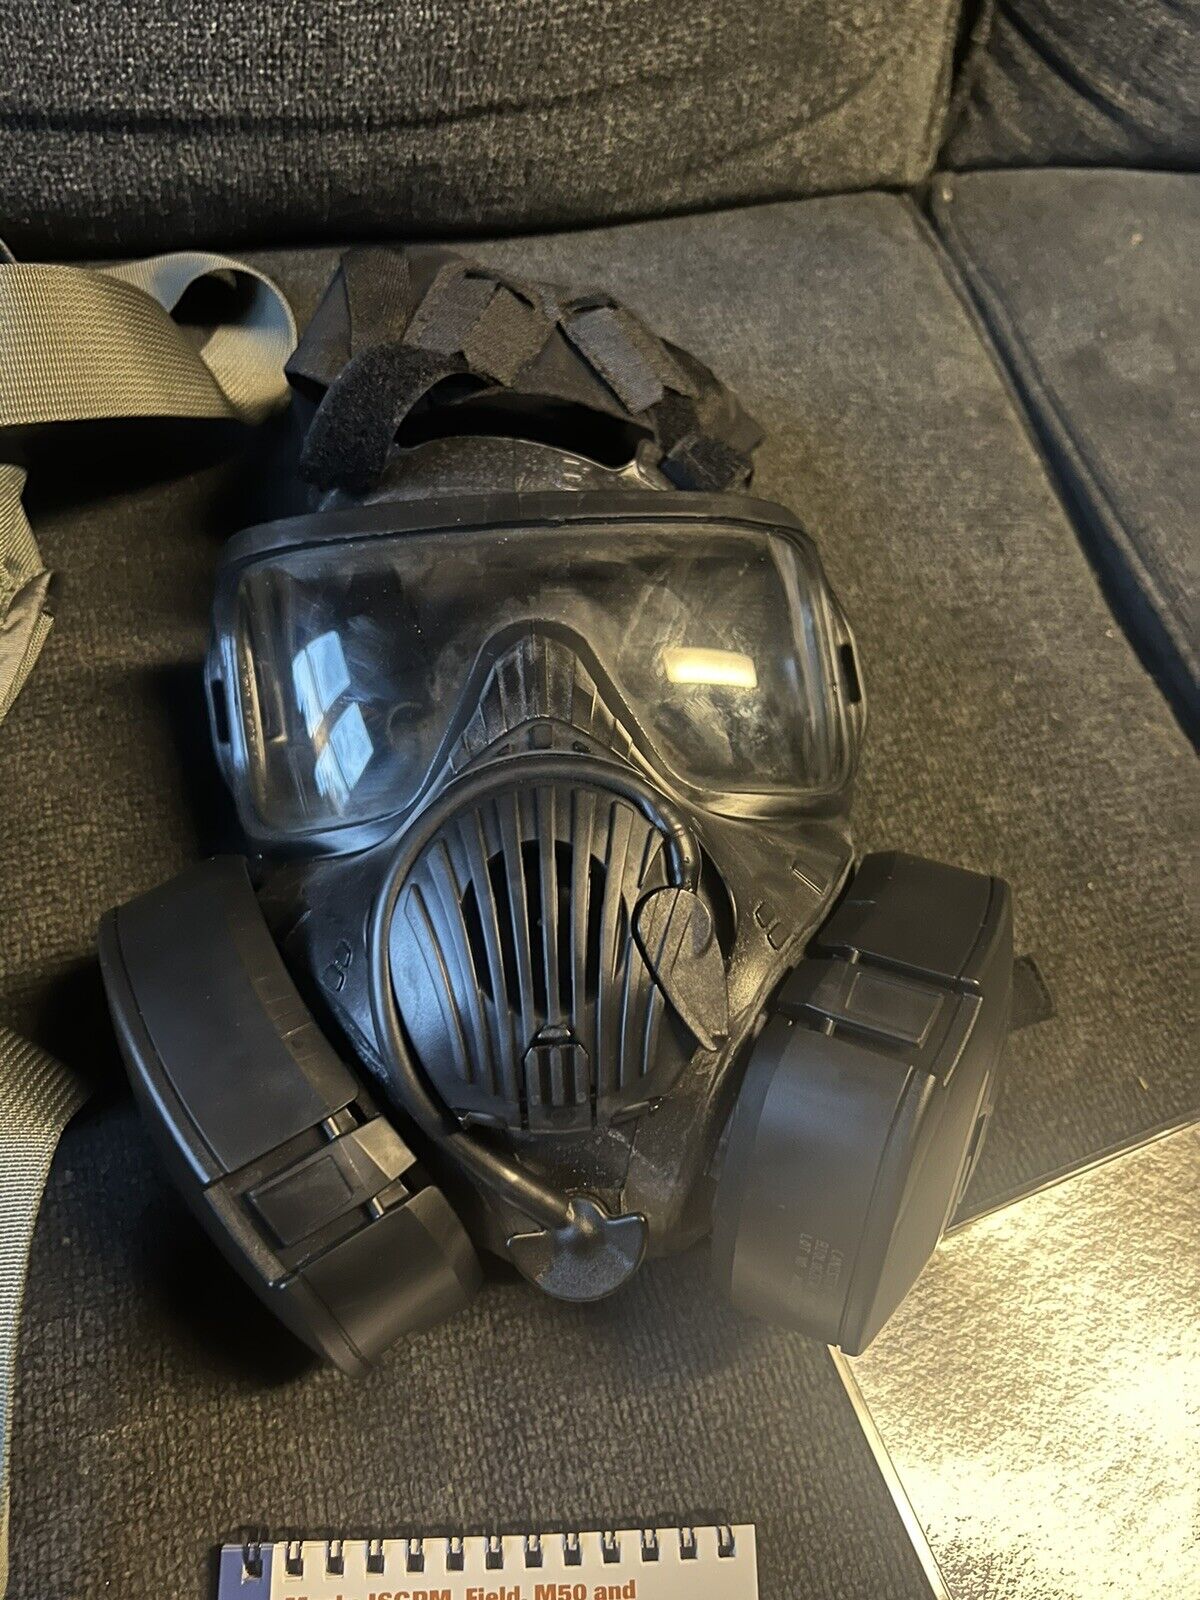 AVON M50 GAS CHEMICAL MASK SIZE SMALL W/ M61 CANISTERS- U.S. MILITARY / LAW ENF